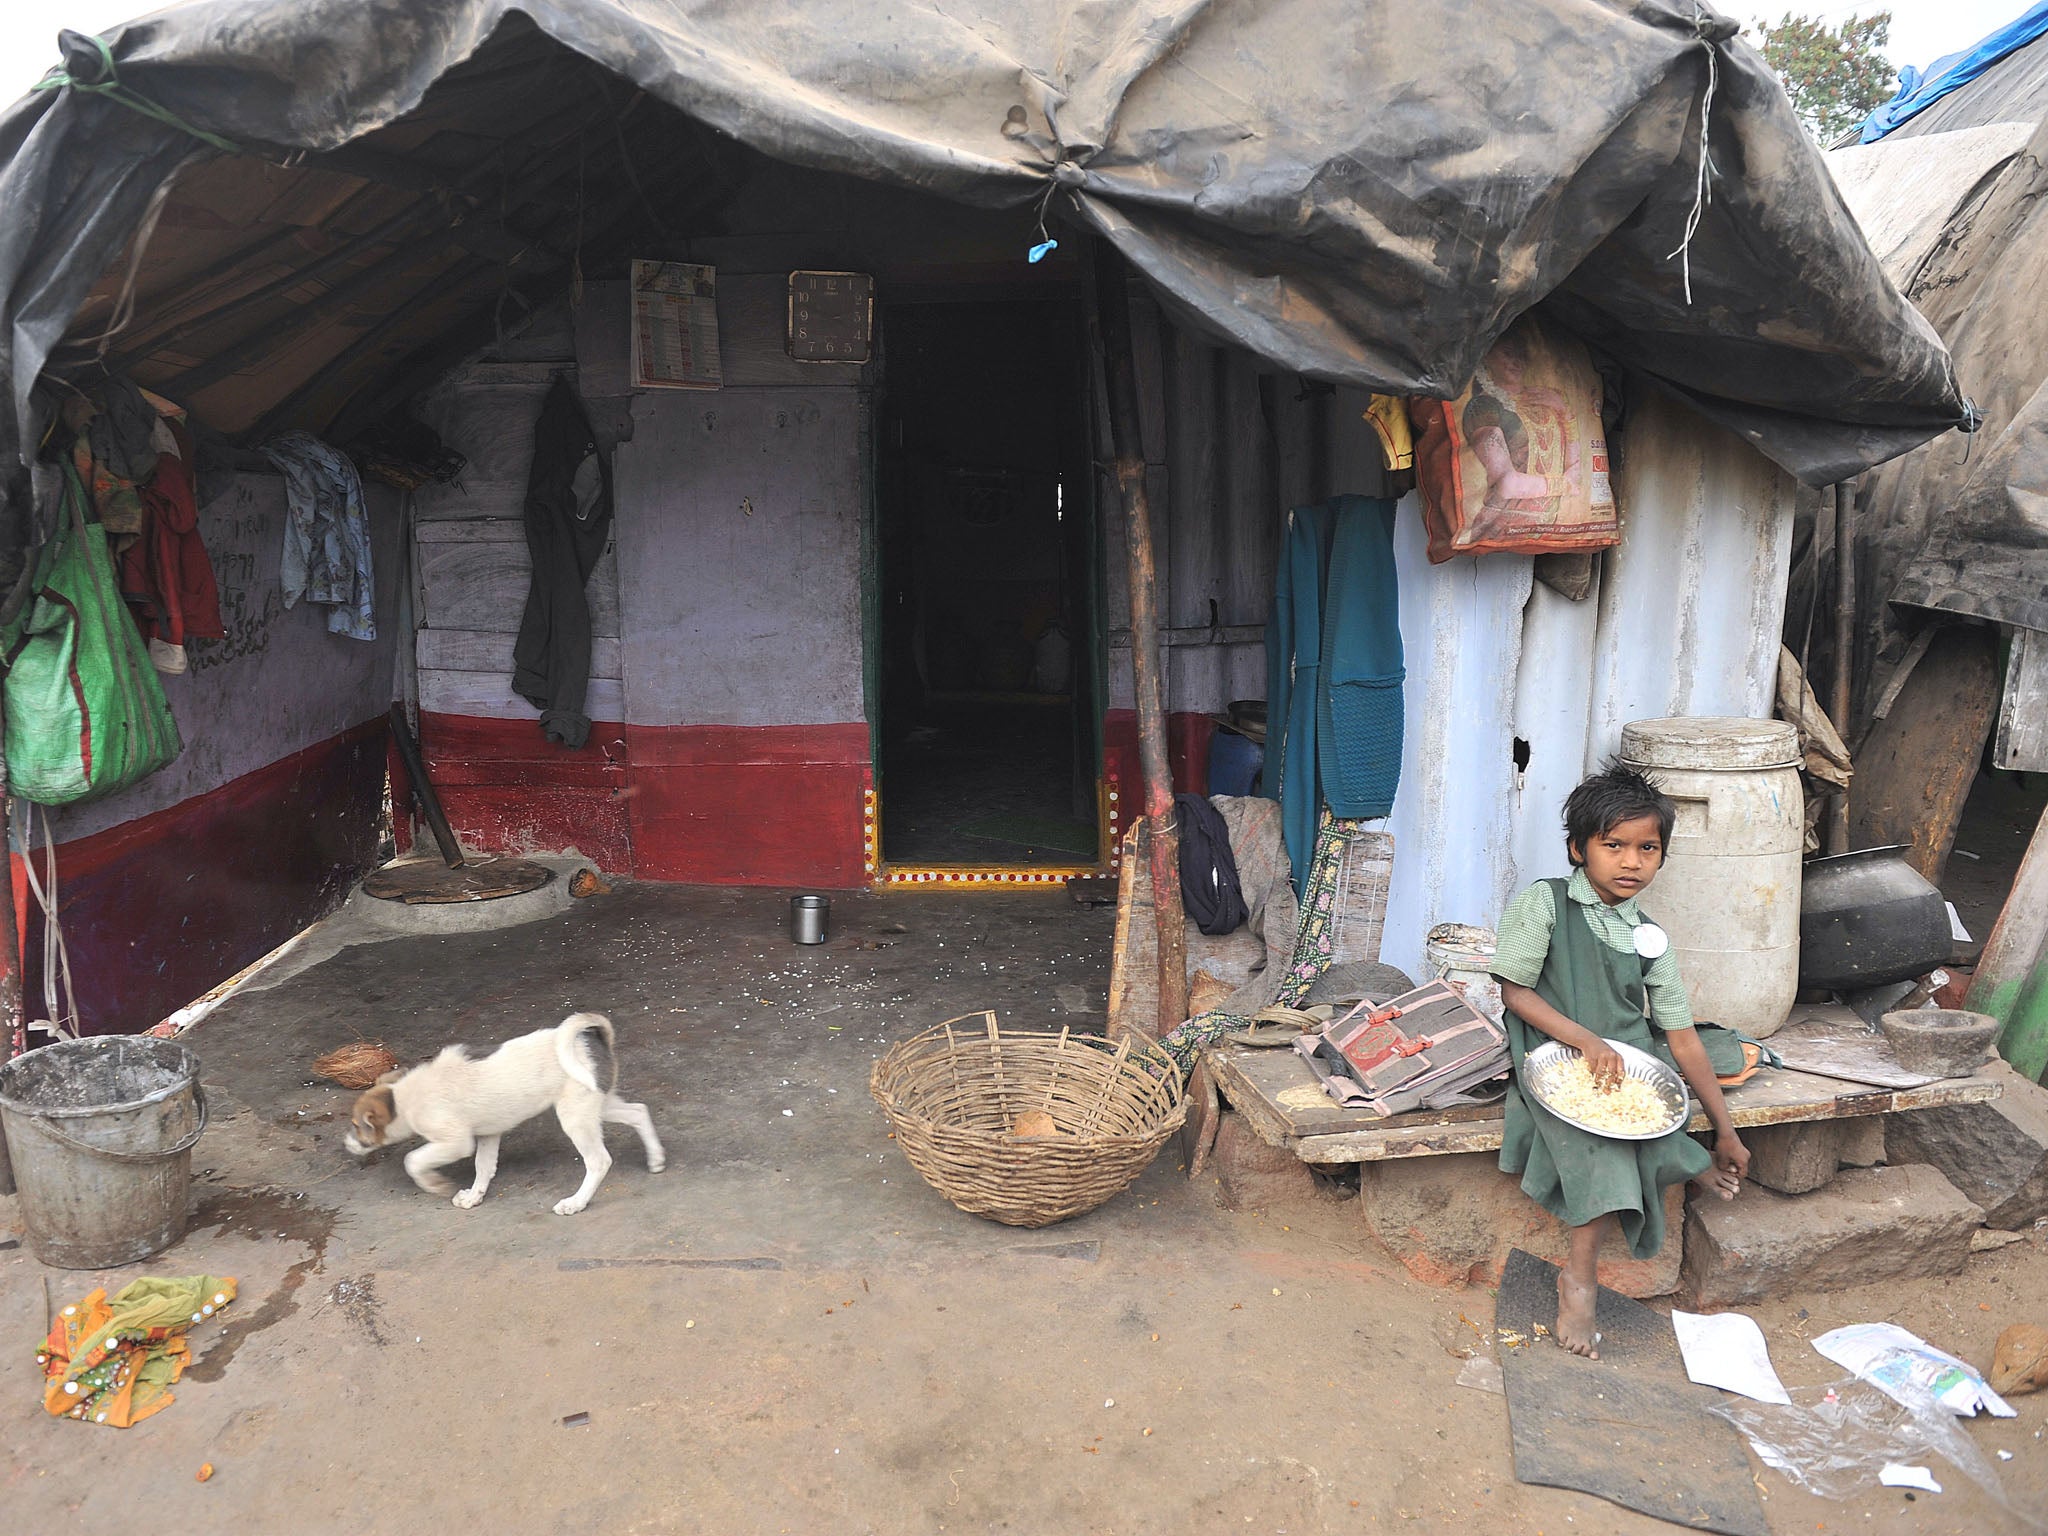 An Indian girl eats outside her home in a slum in Hyderabad